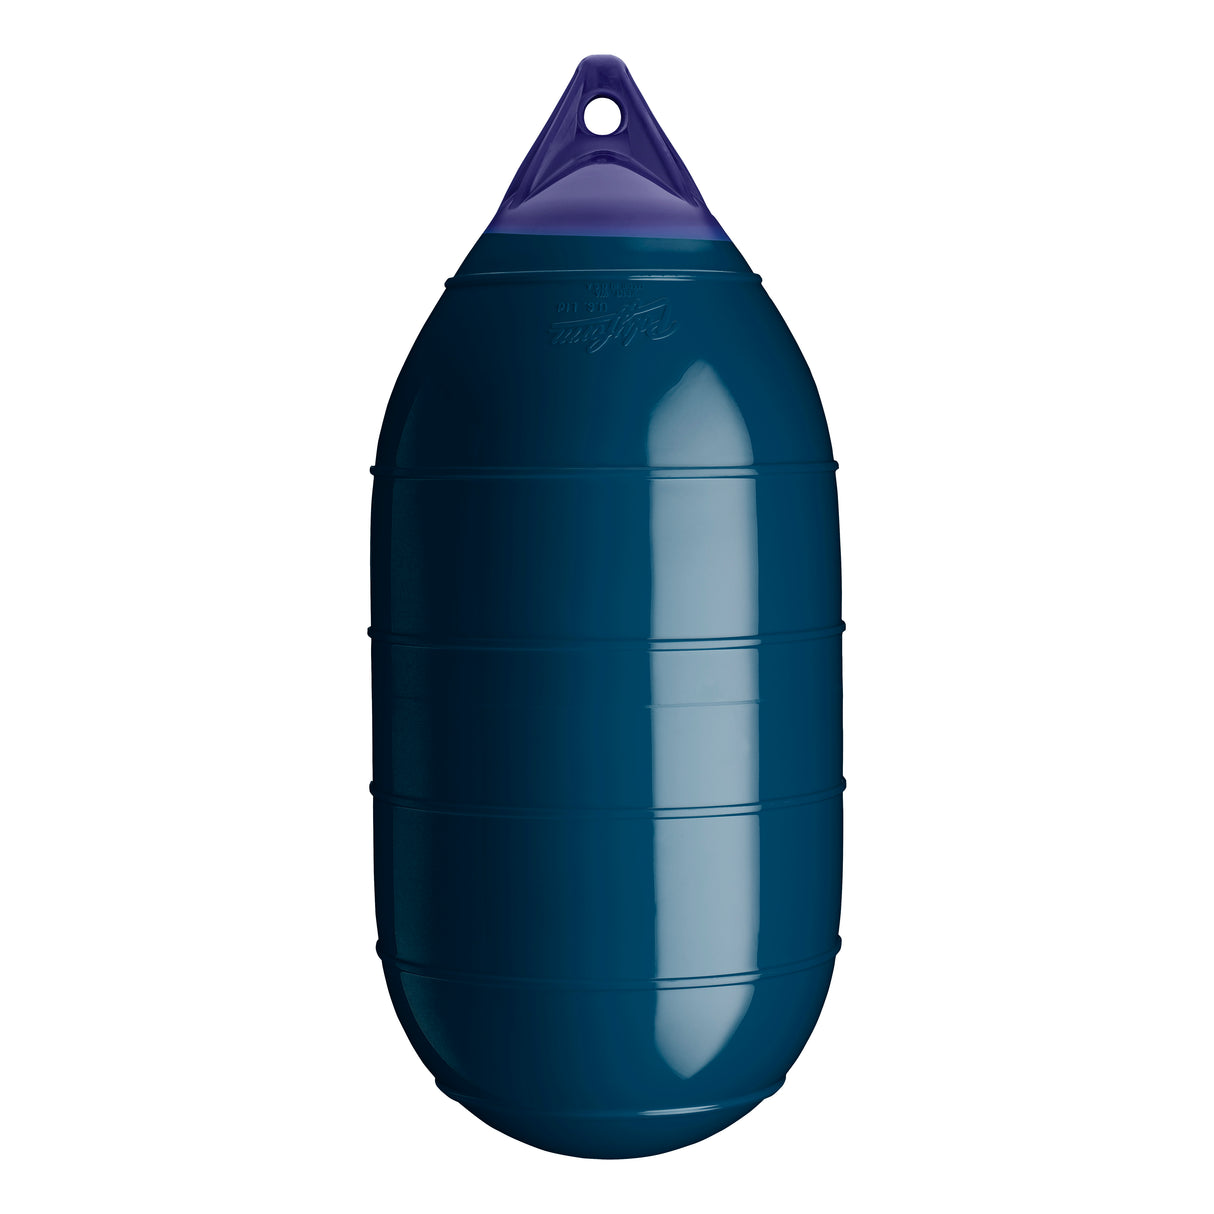 Catalina Blue inflatable low drag buoy, Polyform LD-3 